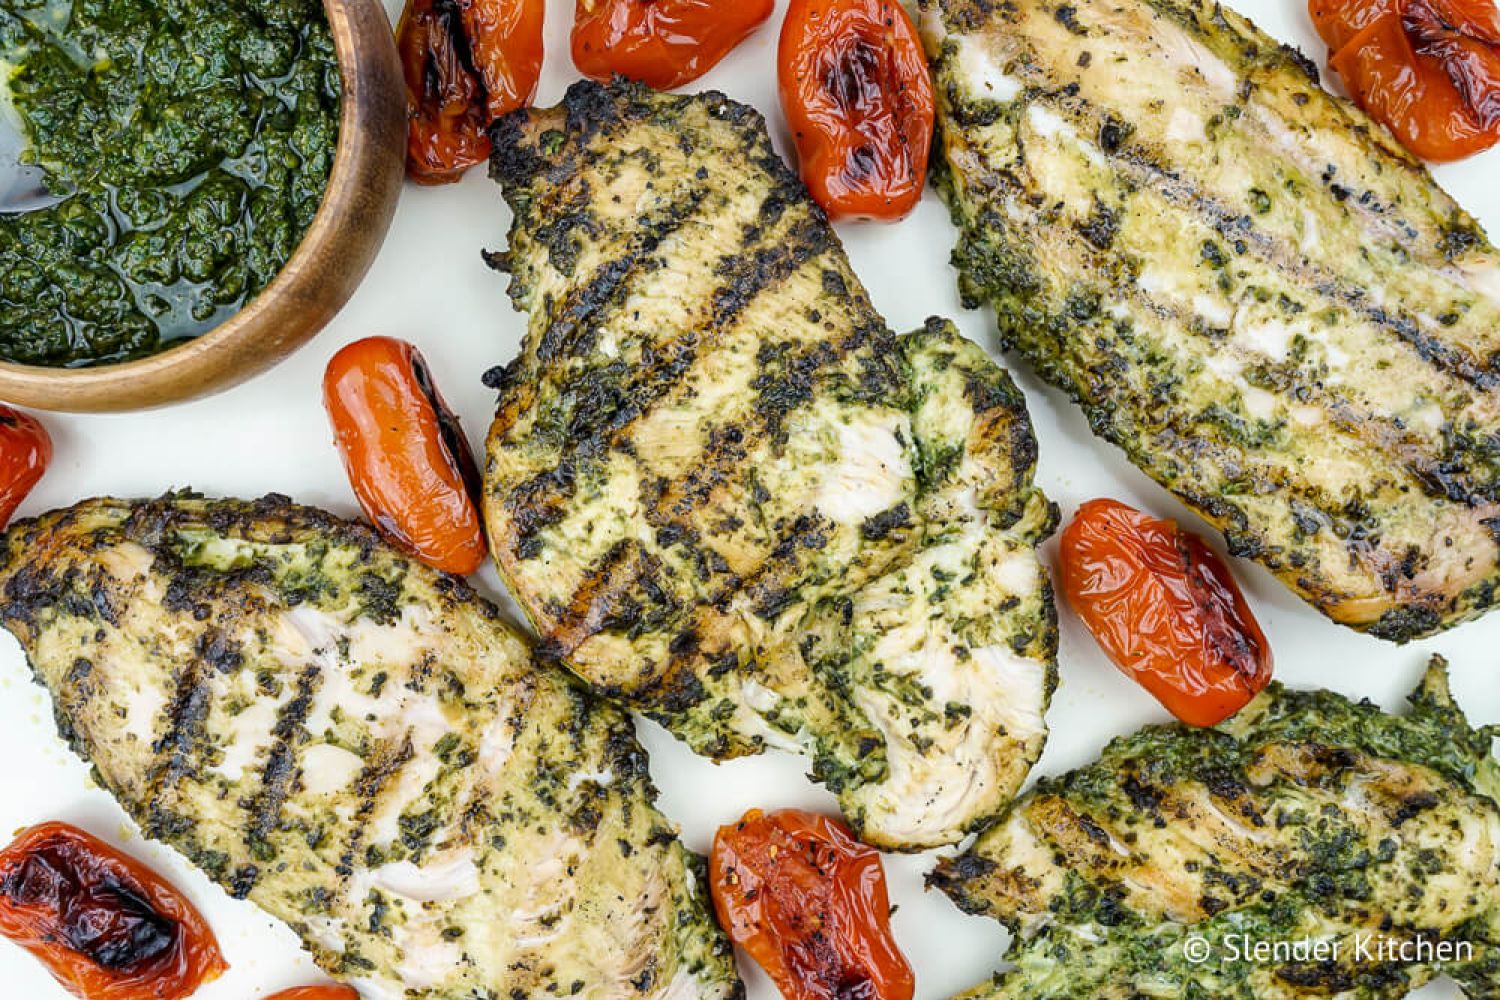 Pesto chicken cooked on the grill with cherry tomatoes and extra pesto sauce.